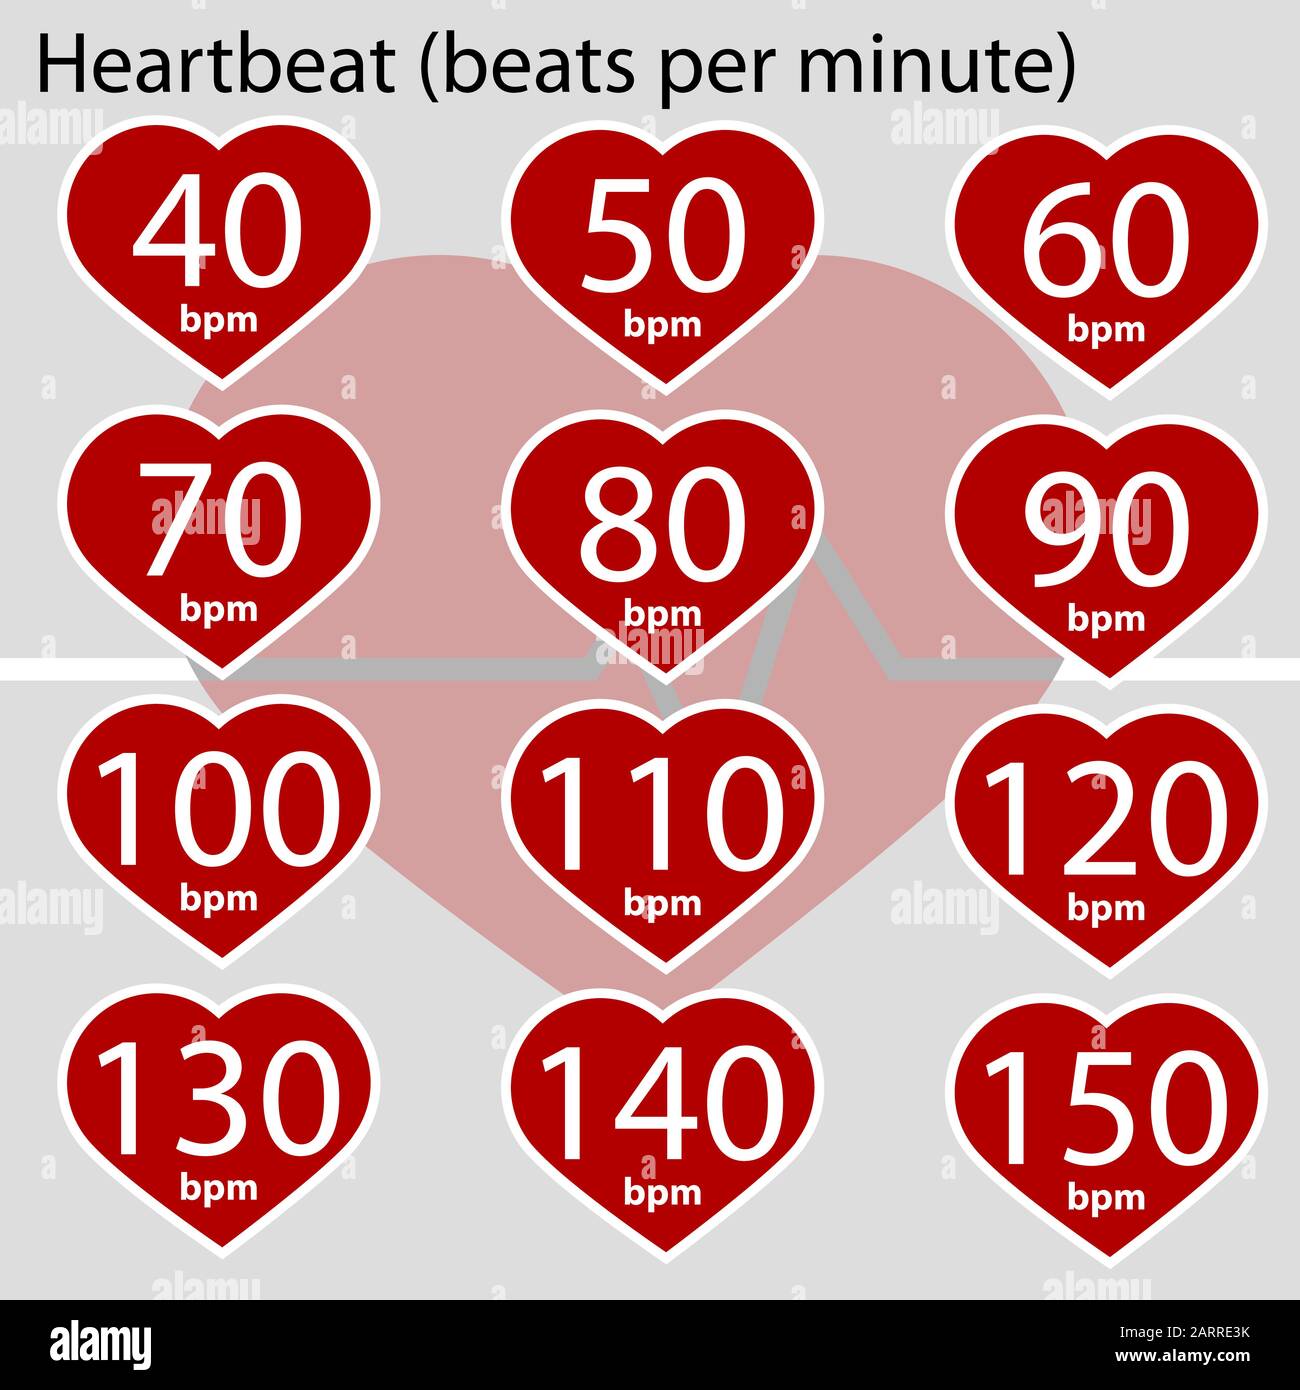 Infographic showing a heart and different values for heart beats per minute Stock Vector